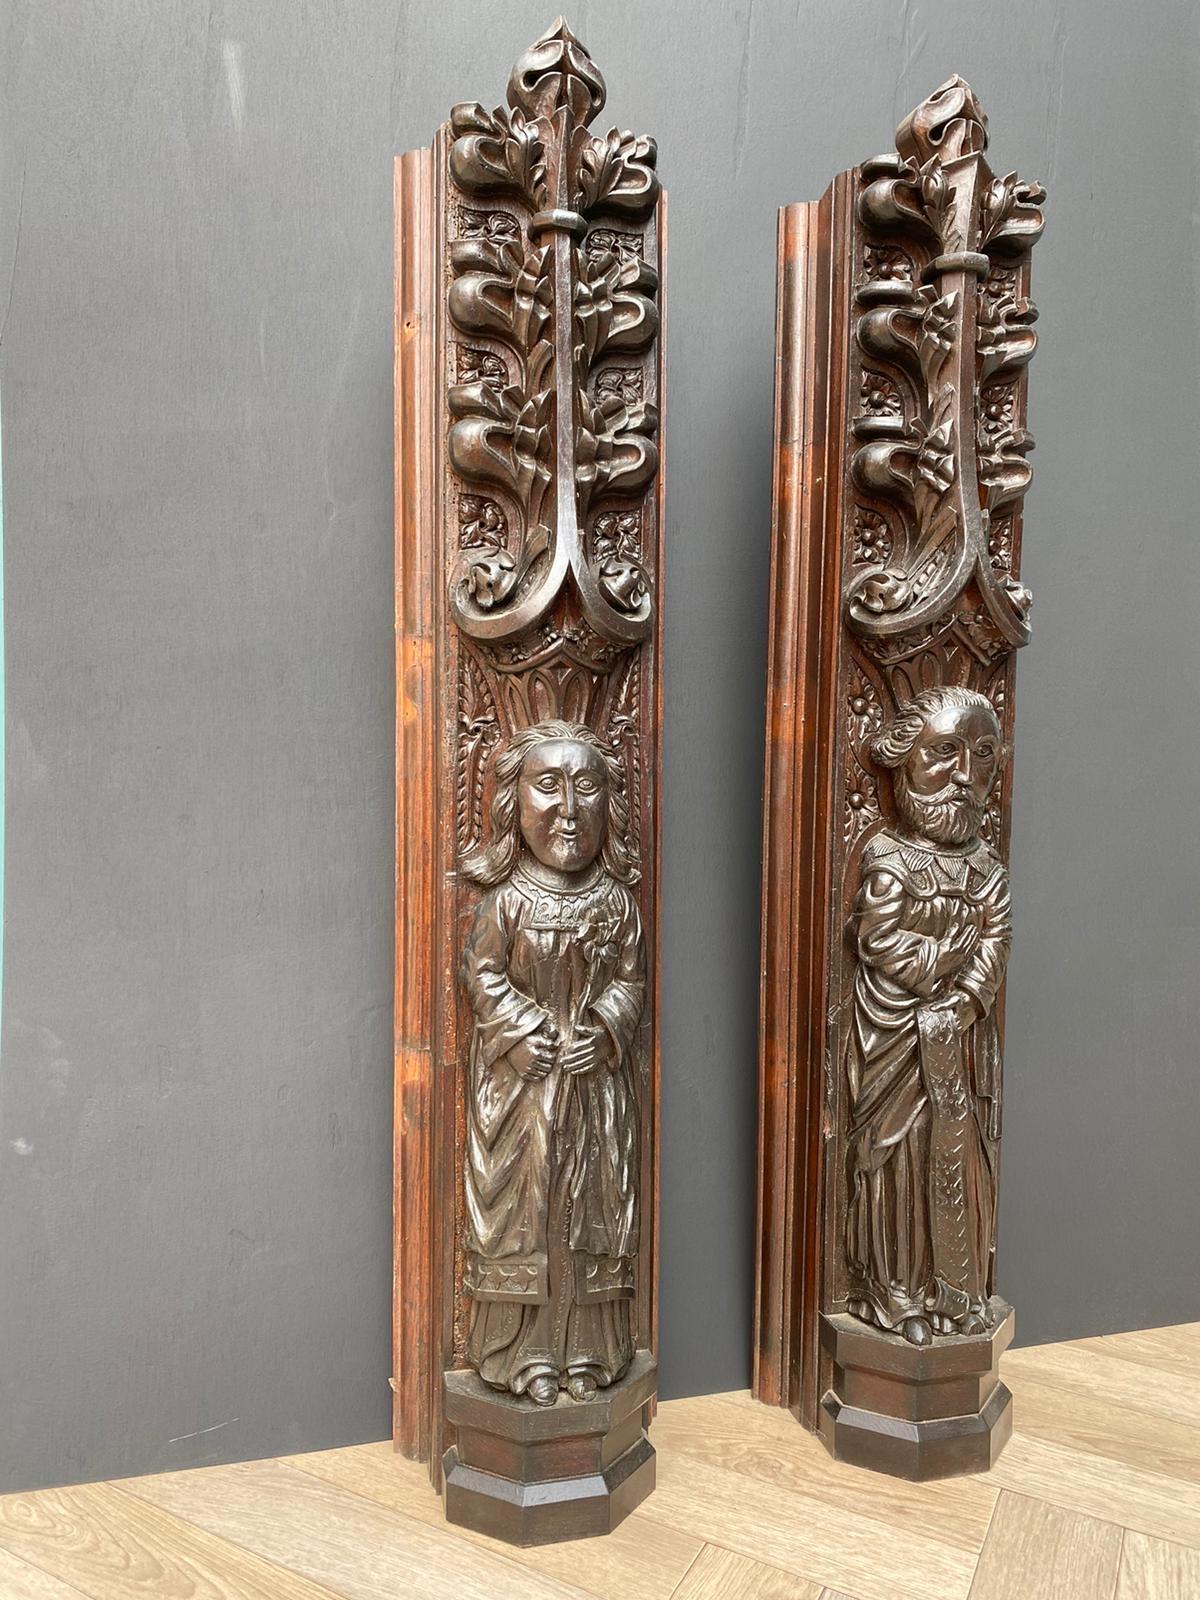 A pair of well carved ecclesiastical figures, salvaged from a house in Hampshire.

Additional Dimensions

Each carving;

Height 114 cm

Width 23 cm

Depth 15 cm.